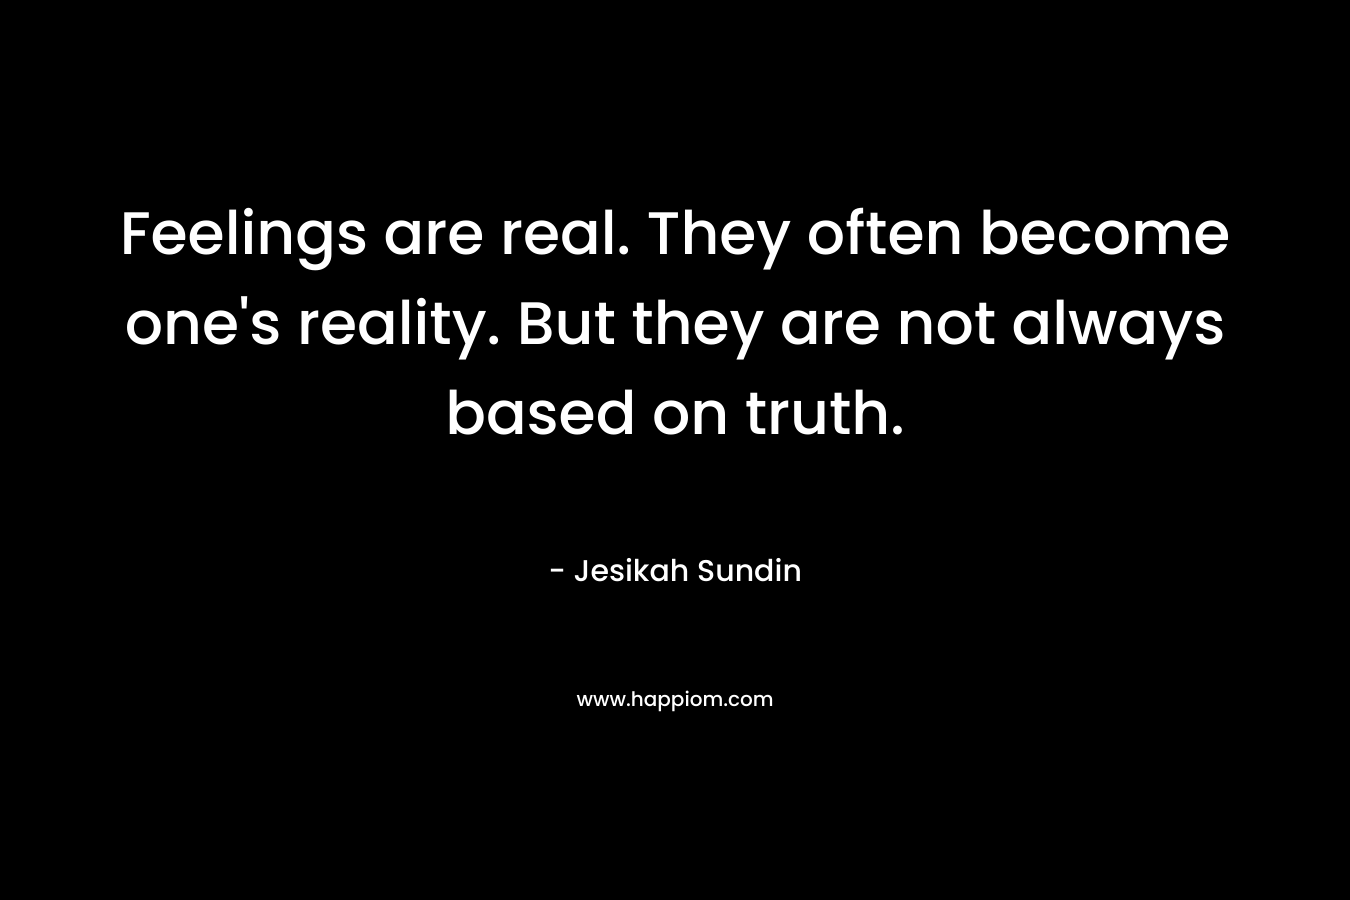 Feelings are real. They often become one's reality. But they are not always based on truth.